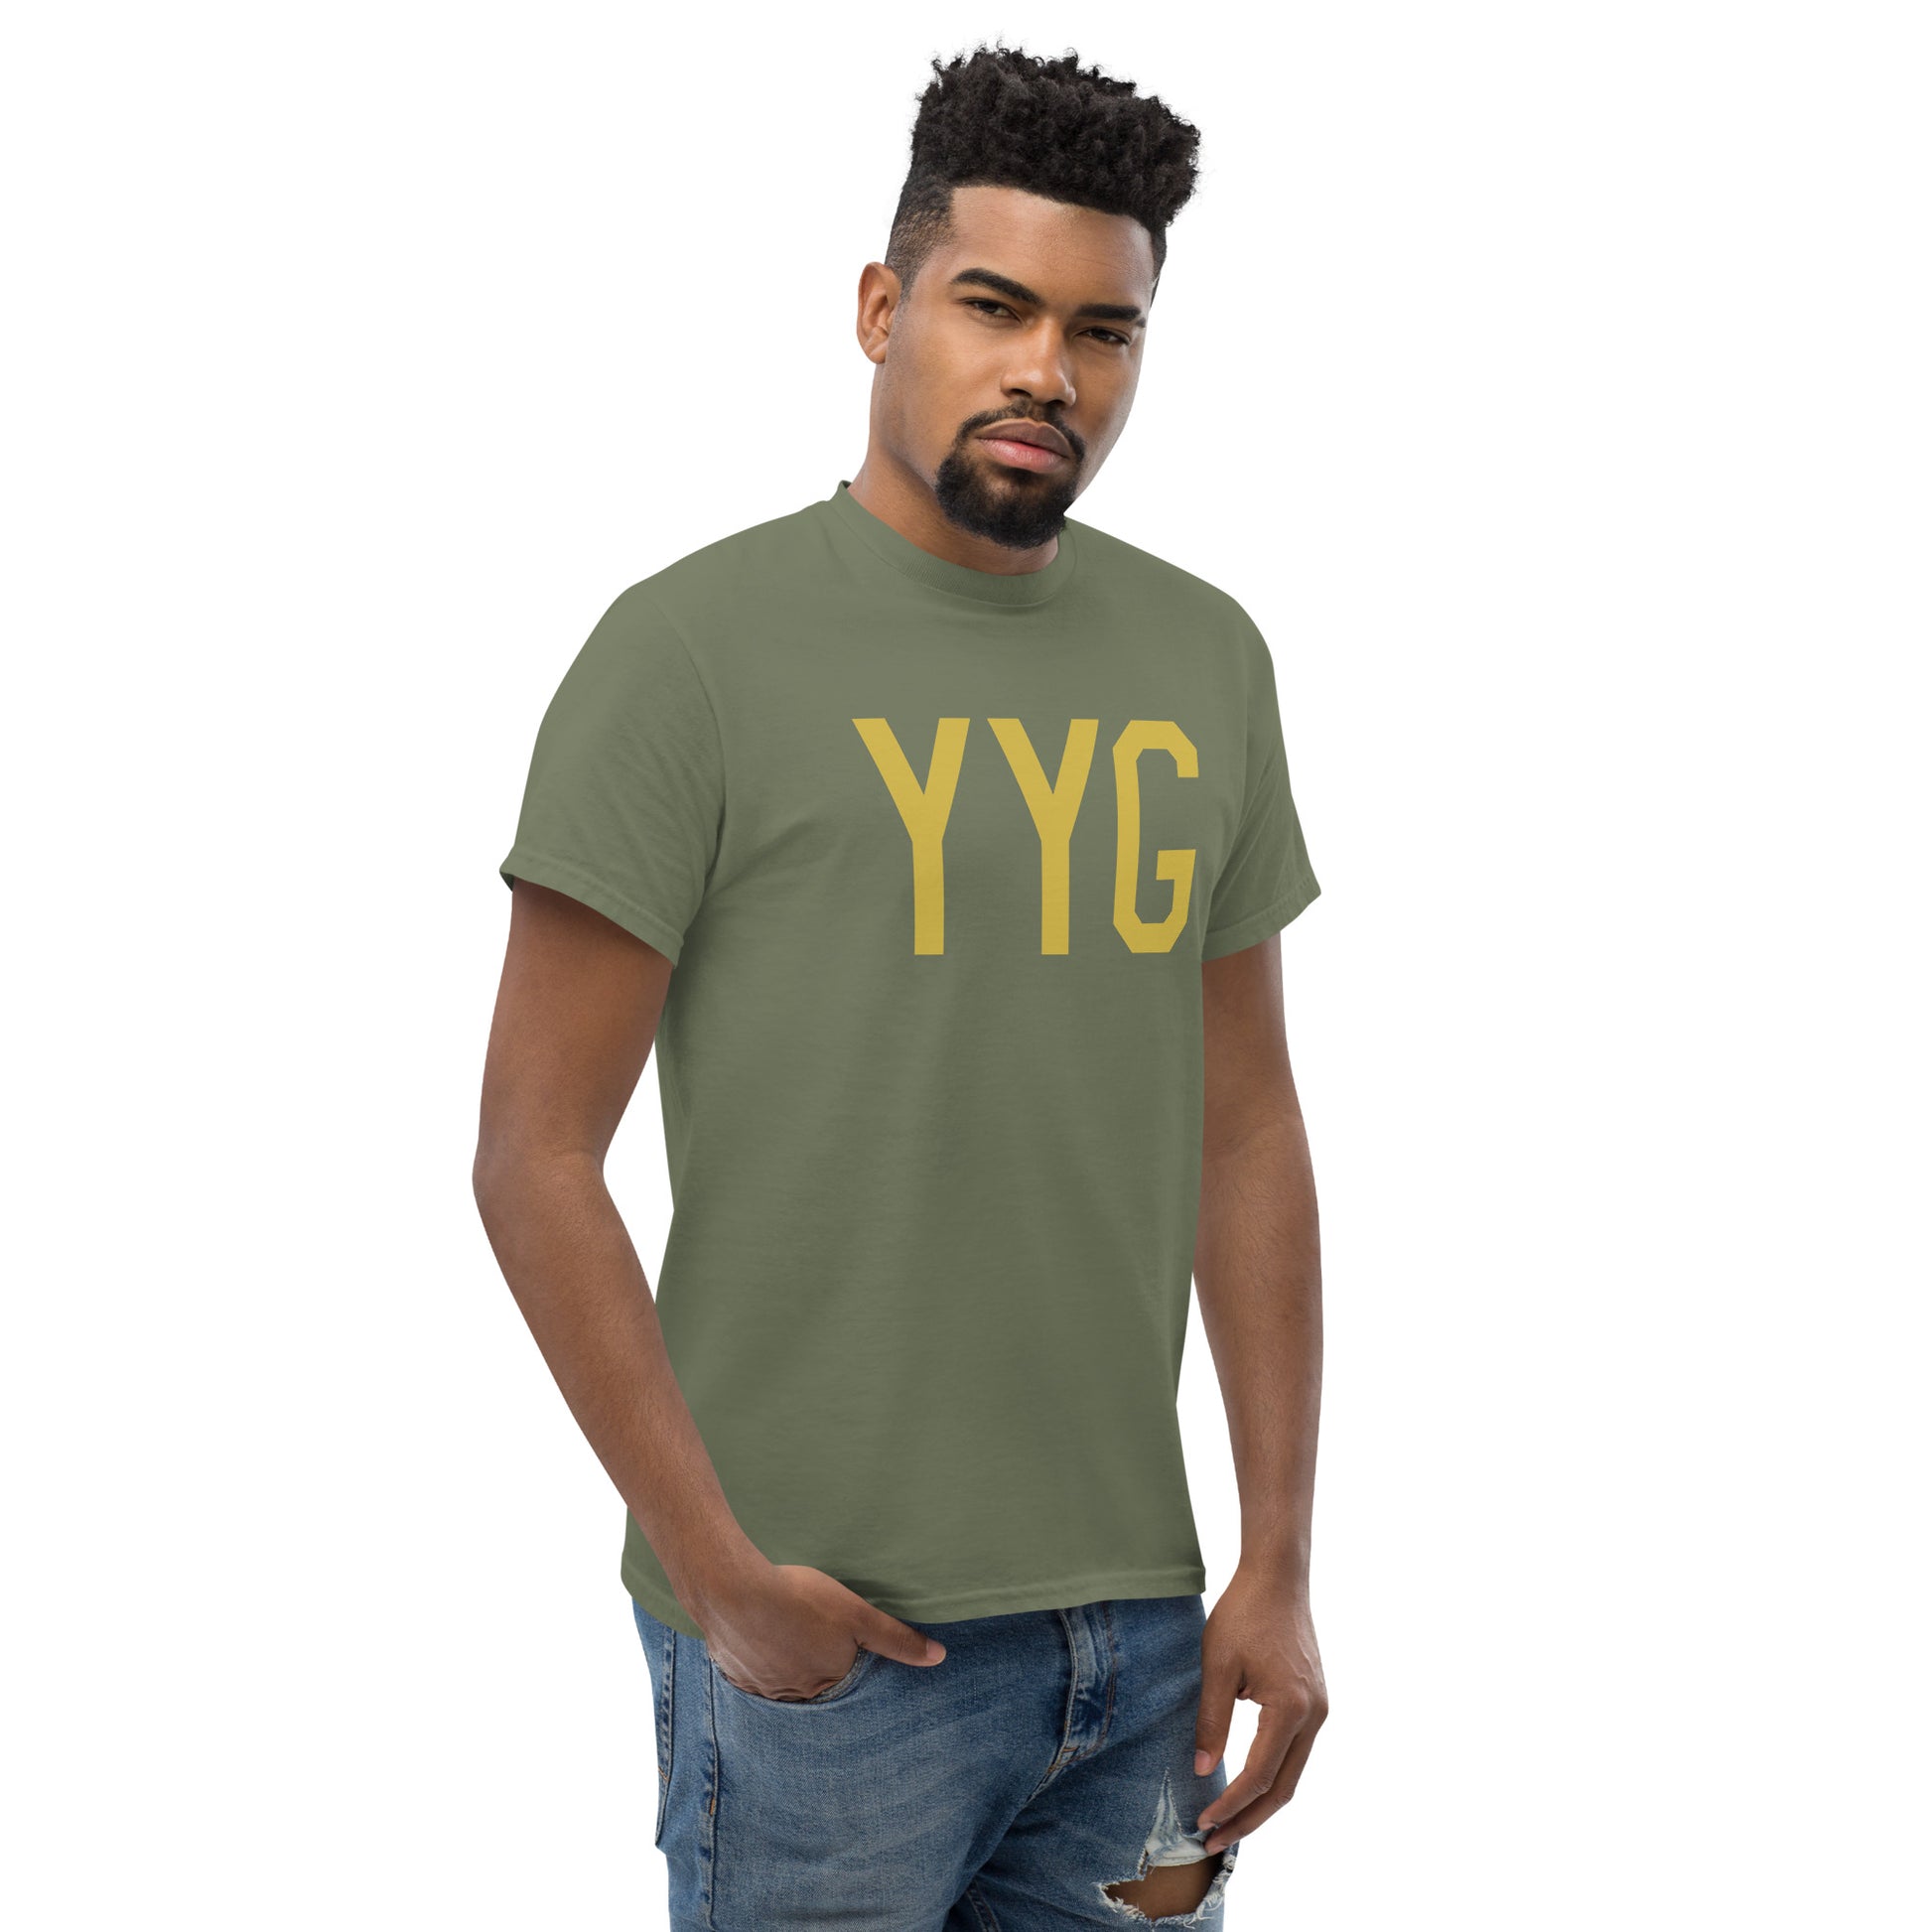 Aviation Enthusiast Men's Tee - Old Gold Graphic • YYG Charlottetown • YHM Designs - Image 08